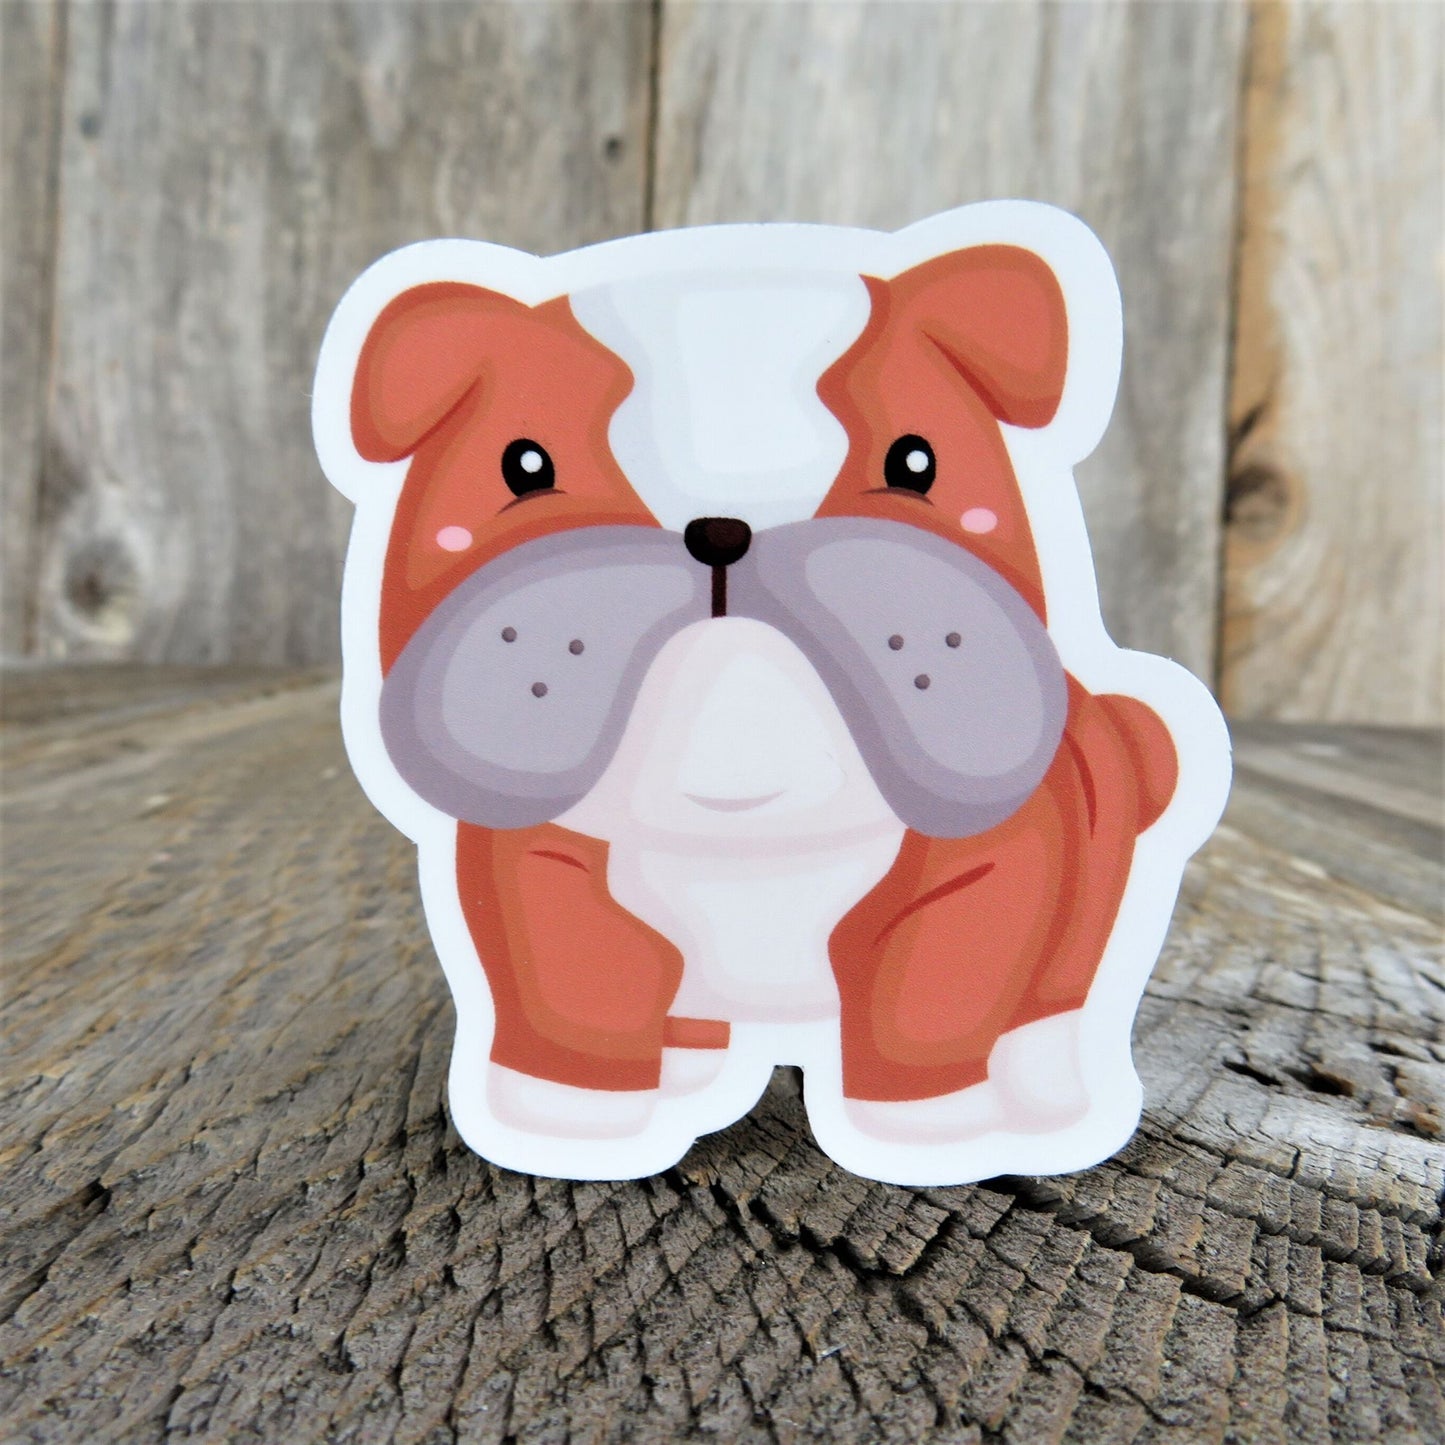 English Bulldog Puppy Sticker Decal Full Color Cartoon Waterproof Dog Lover Sticker for Car Water Bottle Laptop